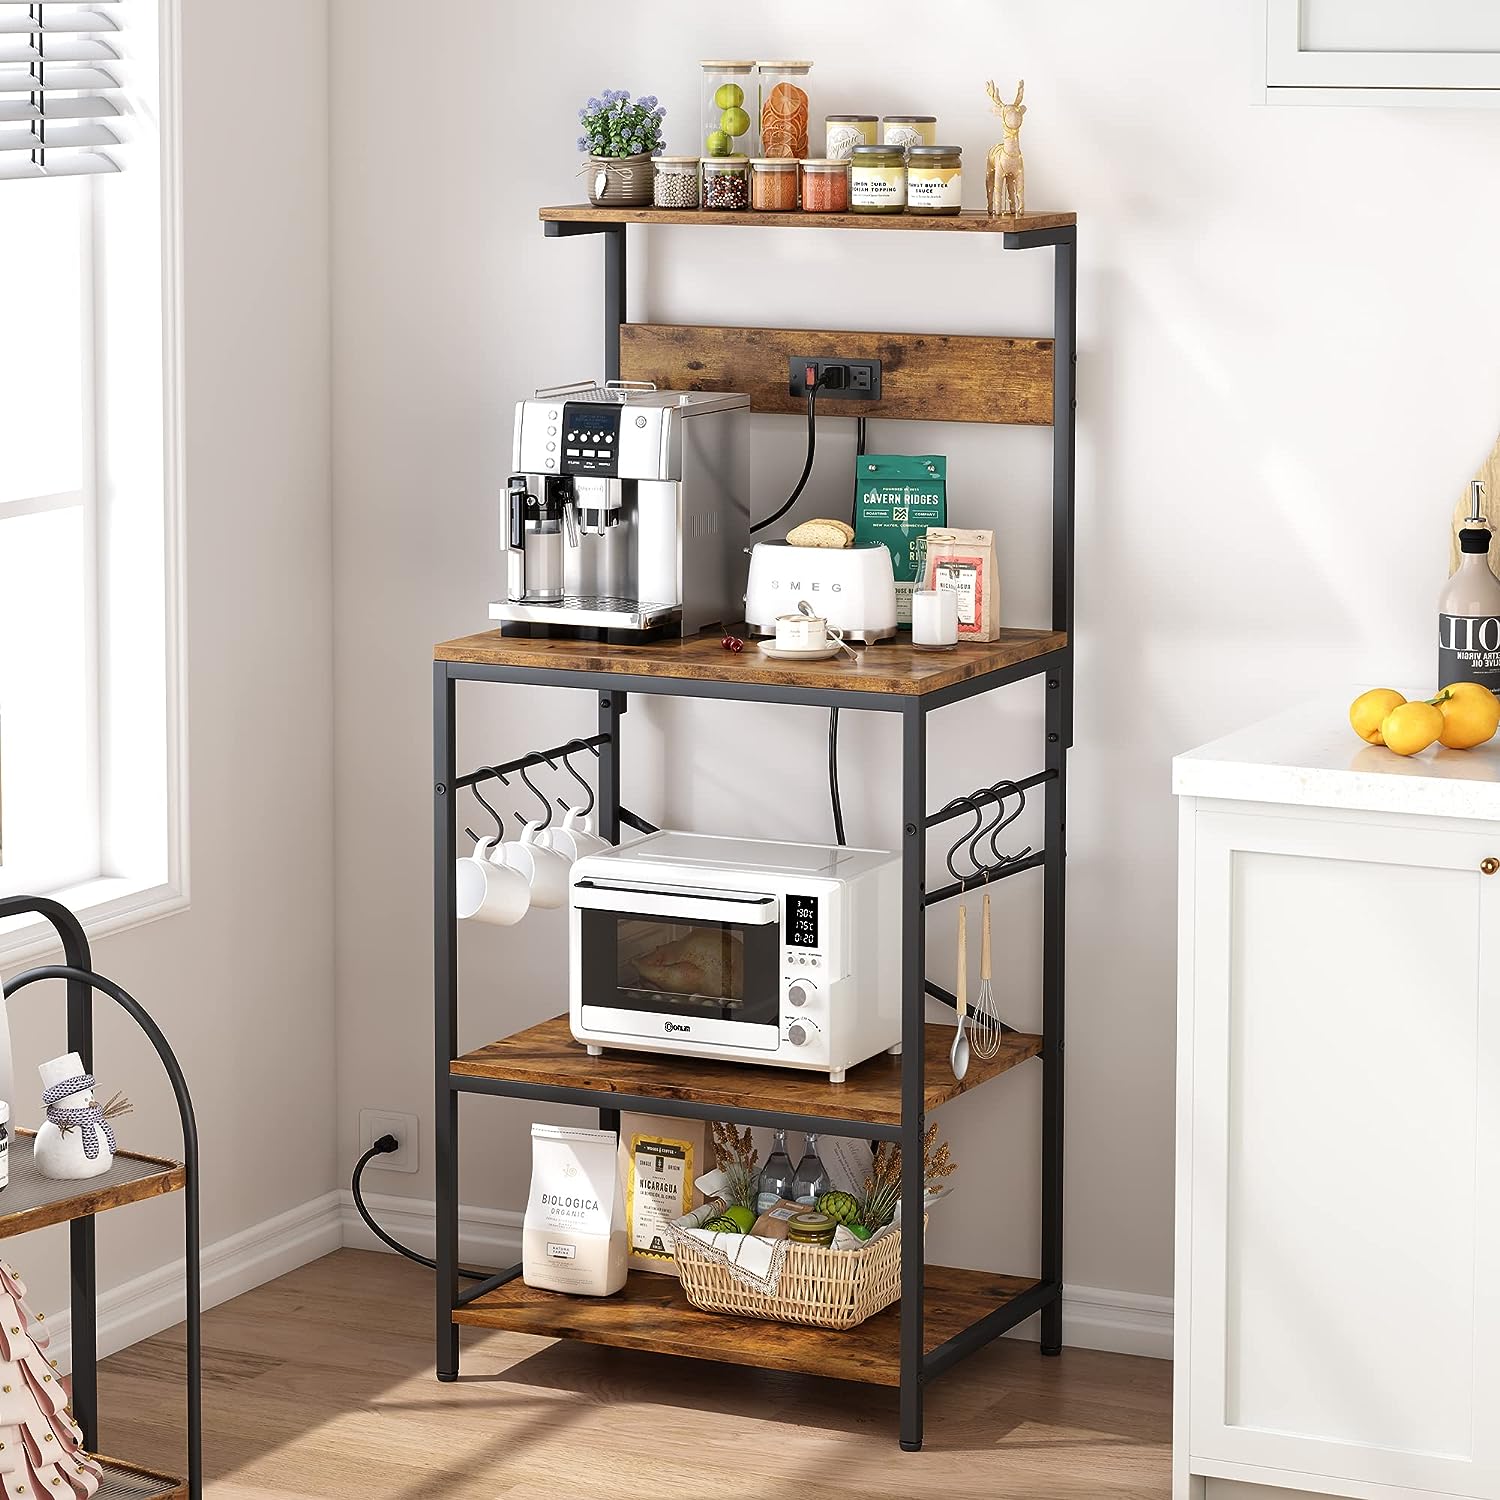 SUPERJARE Kitchen Bakers Rack with Power Outlet